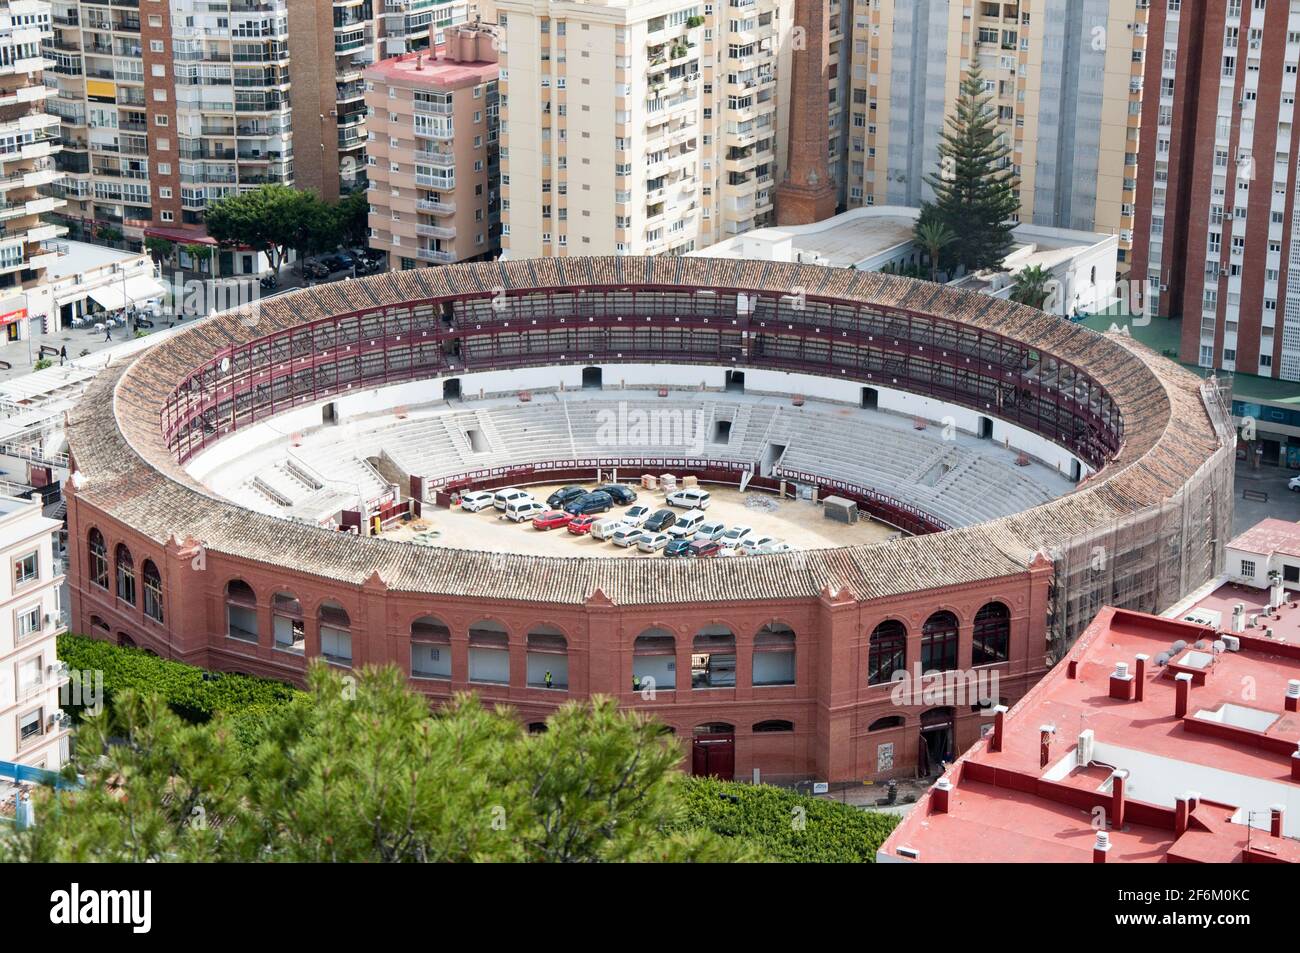 Bull ring in city center Malaga, Spain. Historic round Colosseum with outdoor seats where the popular bull fighting is viewed Stock Photo